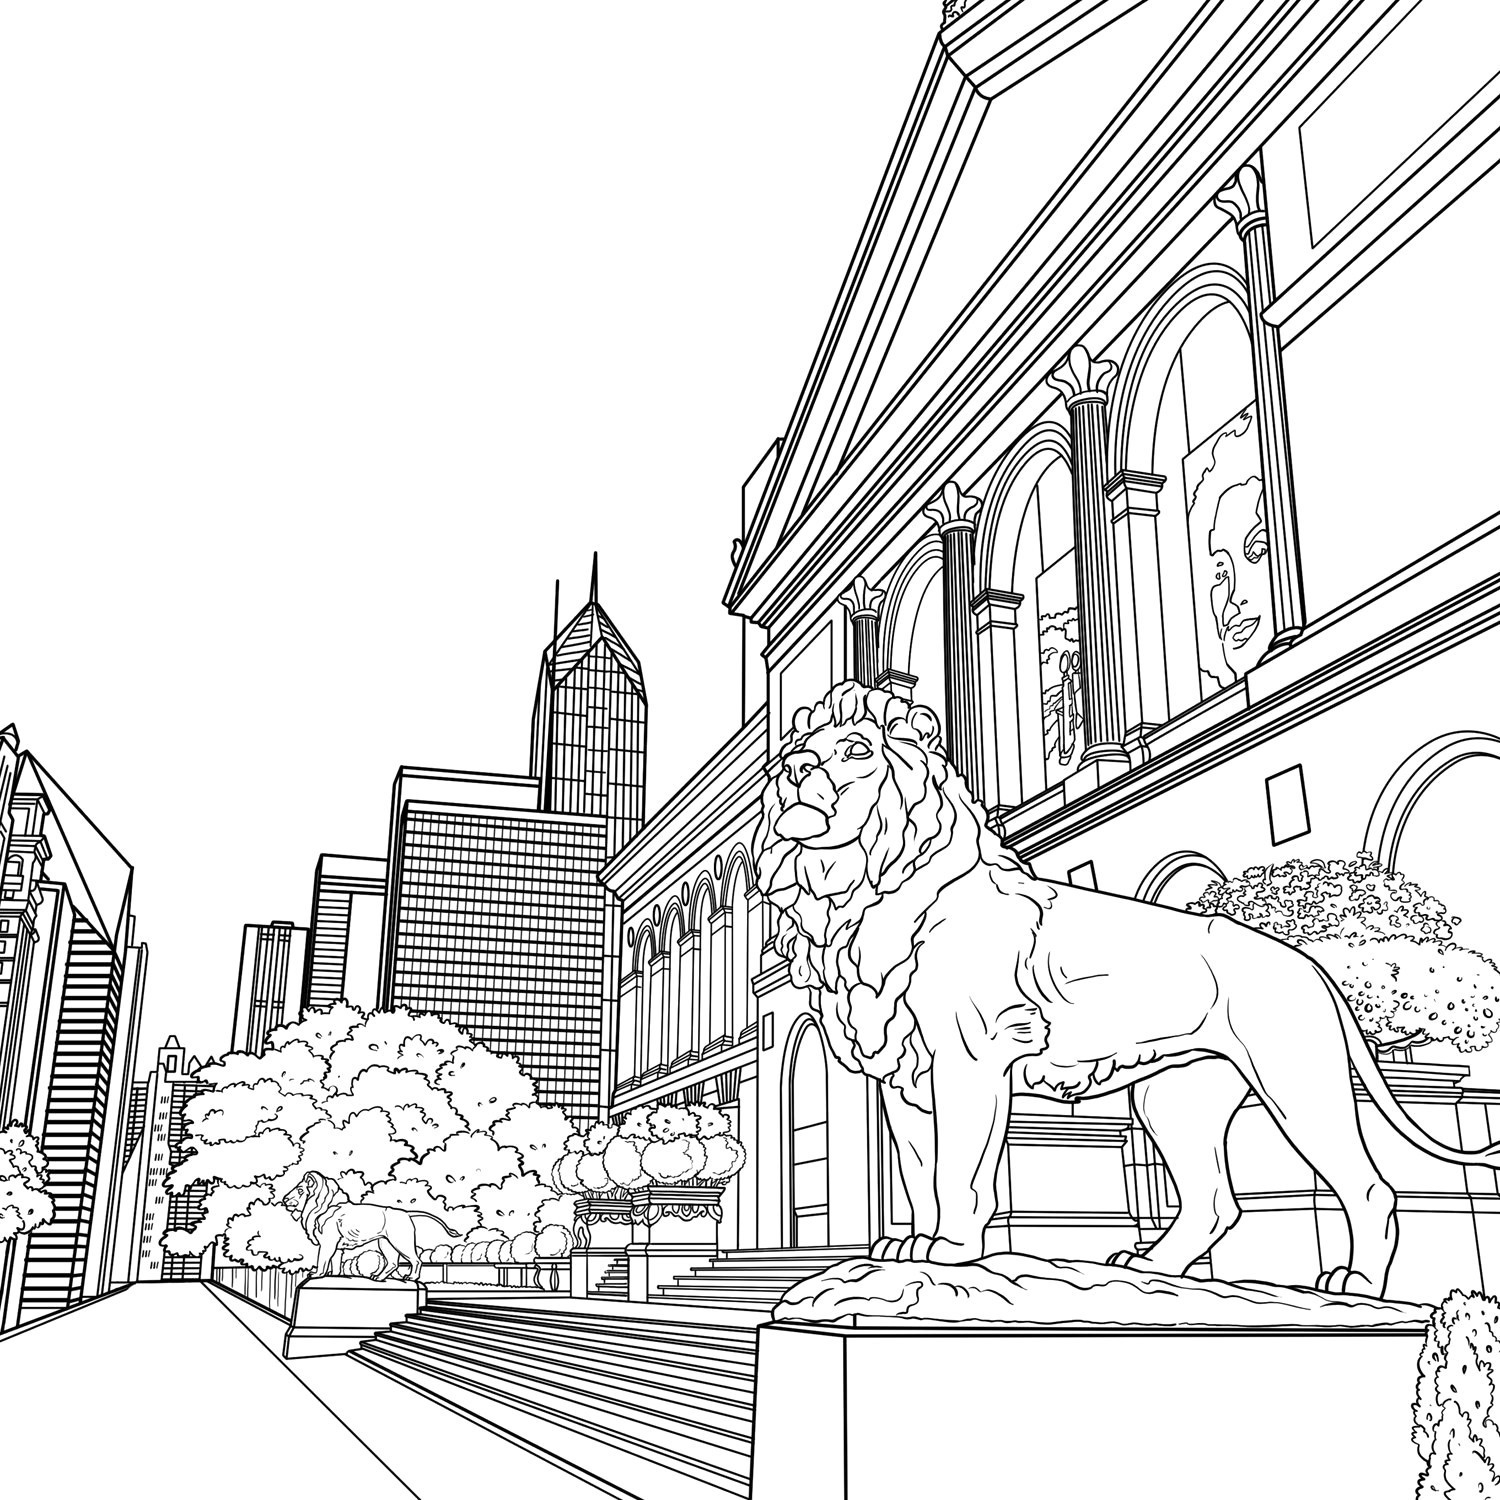 Skyline Coloring Pages Chicago Bears Paintings Search Result At Paintingvalley